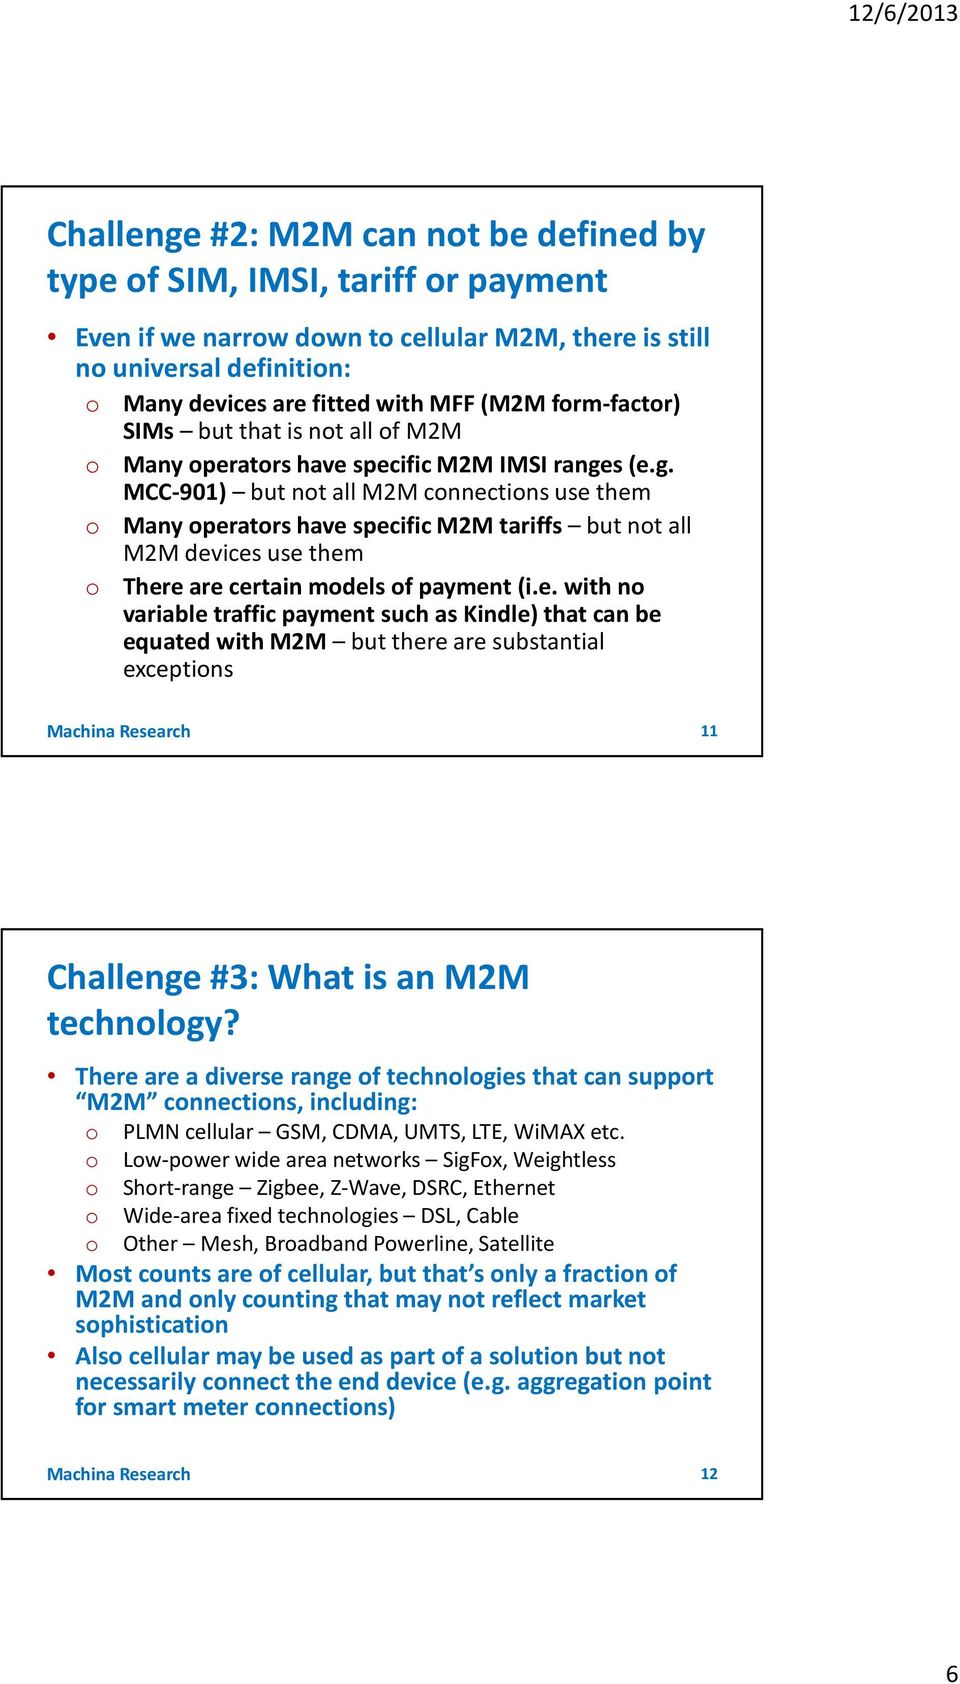 s (e.g. MCC-901) but not all M2M connections use them o Many operators have specific M2M tariffs but not all M2M devices use them o There are certain models of payment (i.e. with no variable traffic payment such as Kindle) that can be equated with M2M but there are substantial exceptions Machina Research 11 Challenge #3: What is an M2M technology?